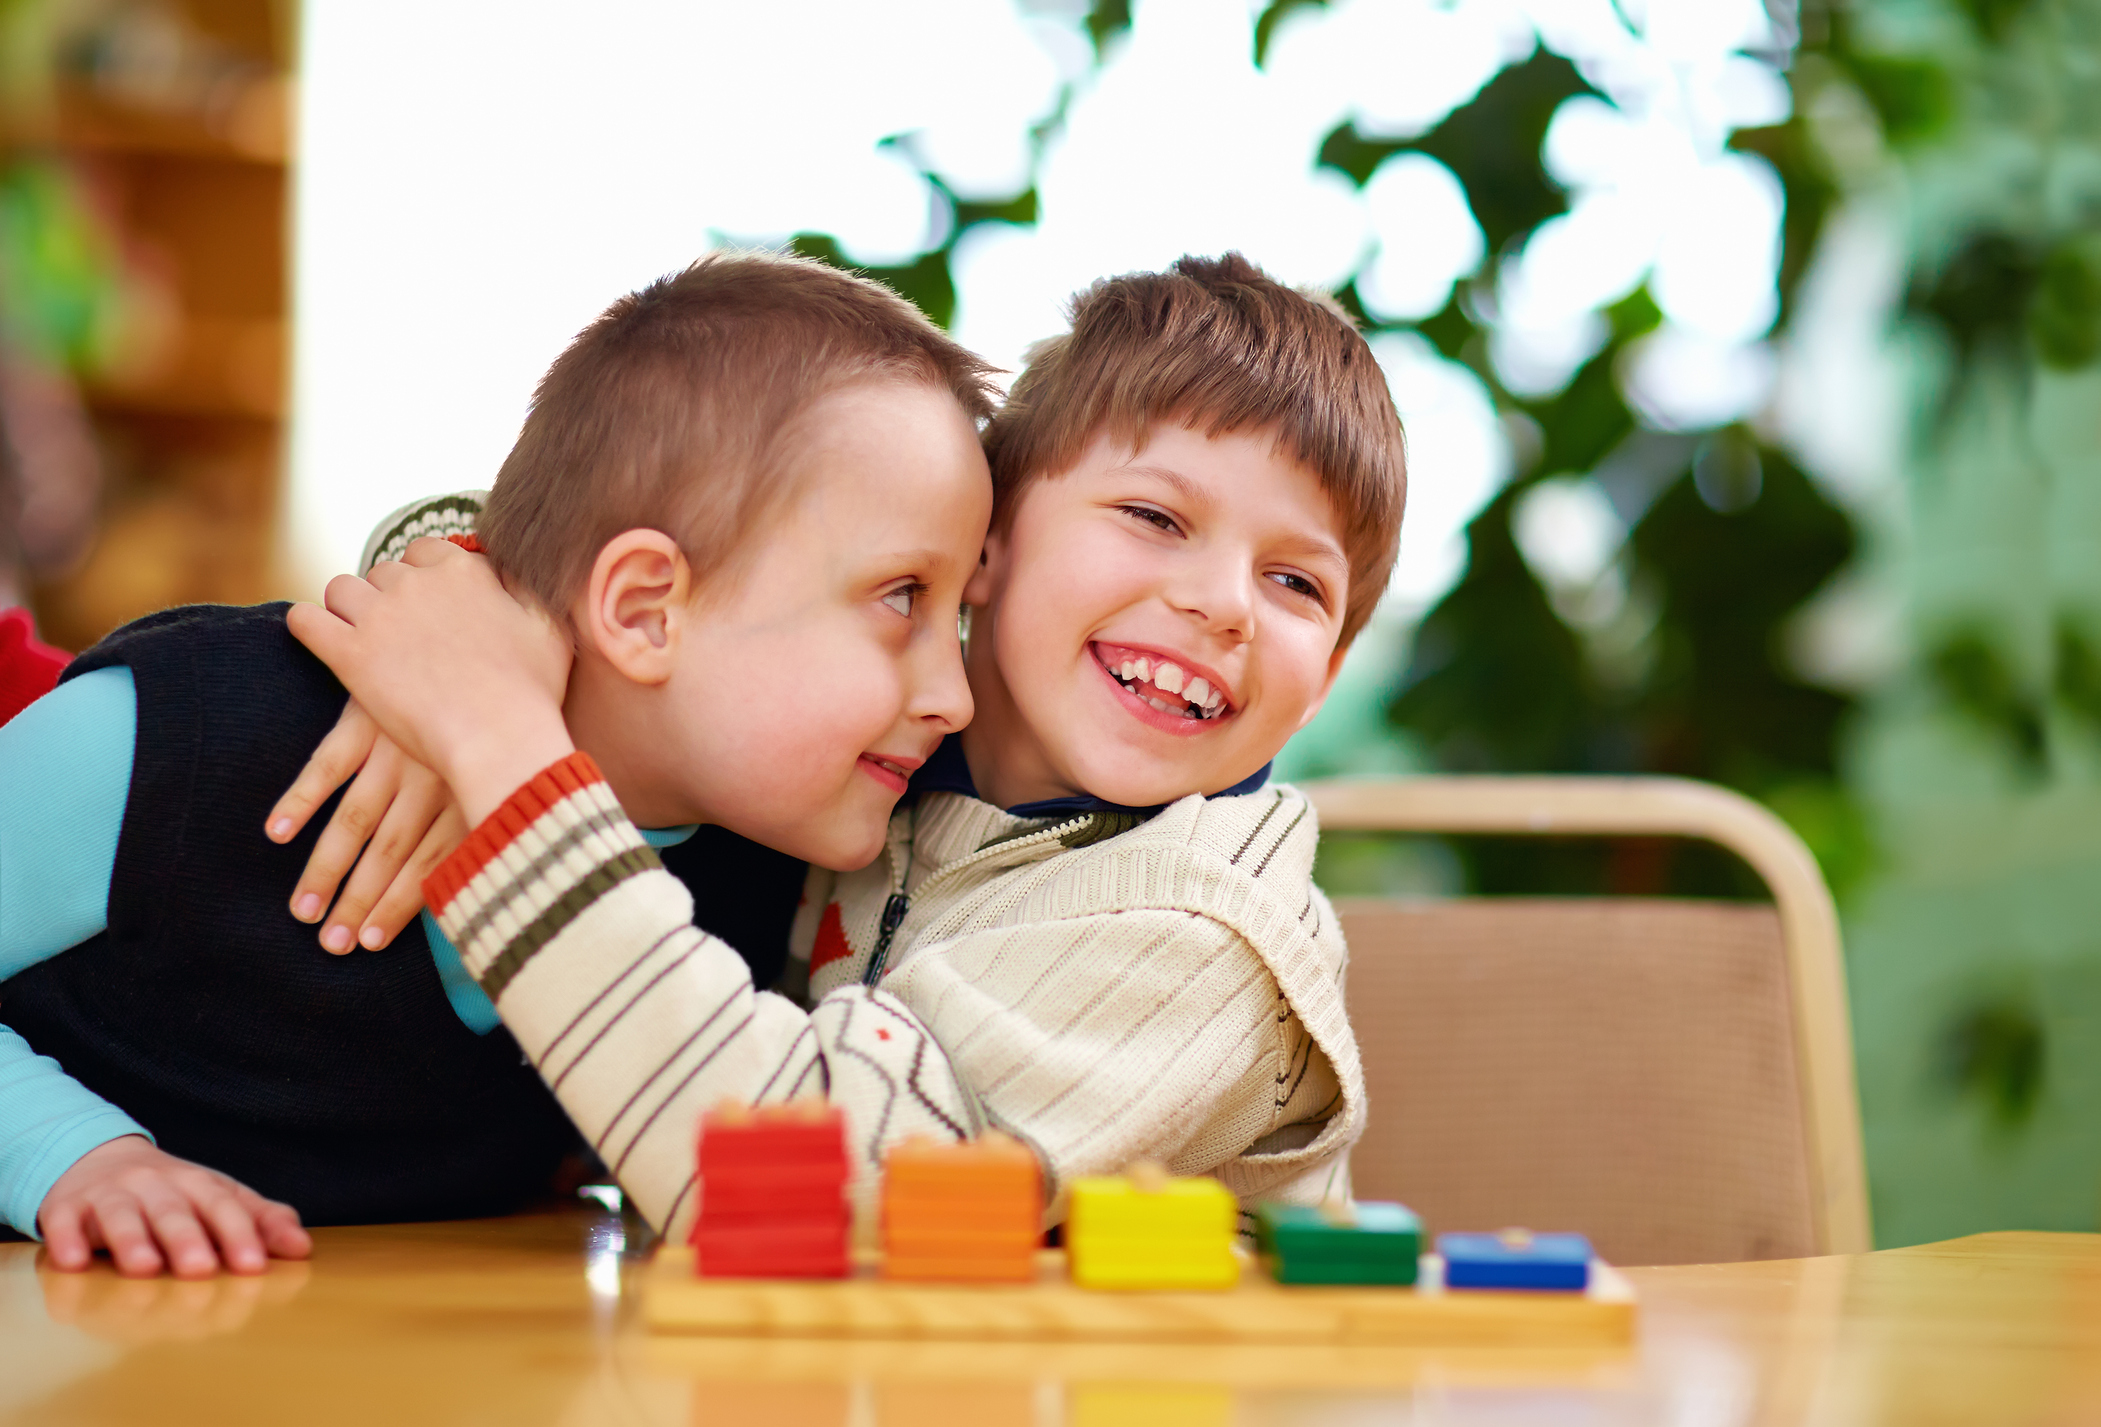 Two disabled boys happily hugging and playing together